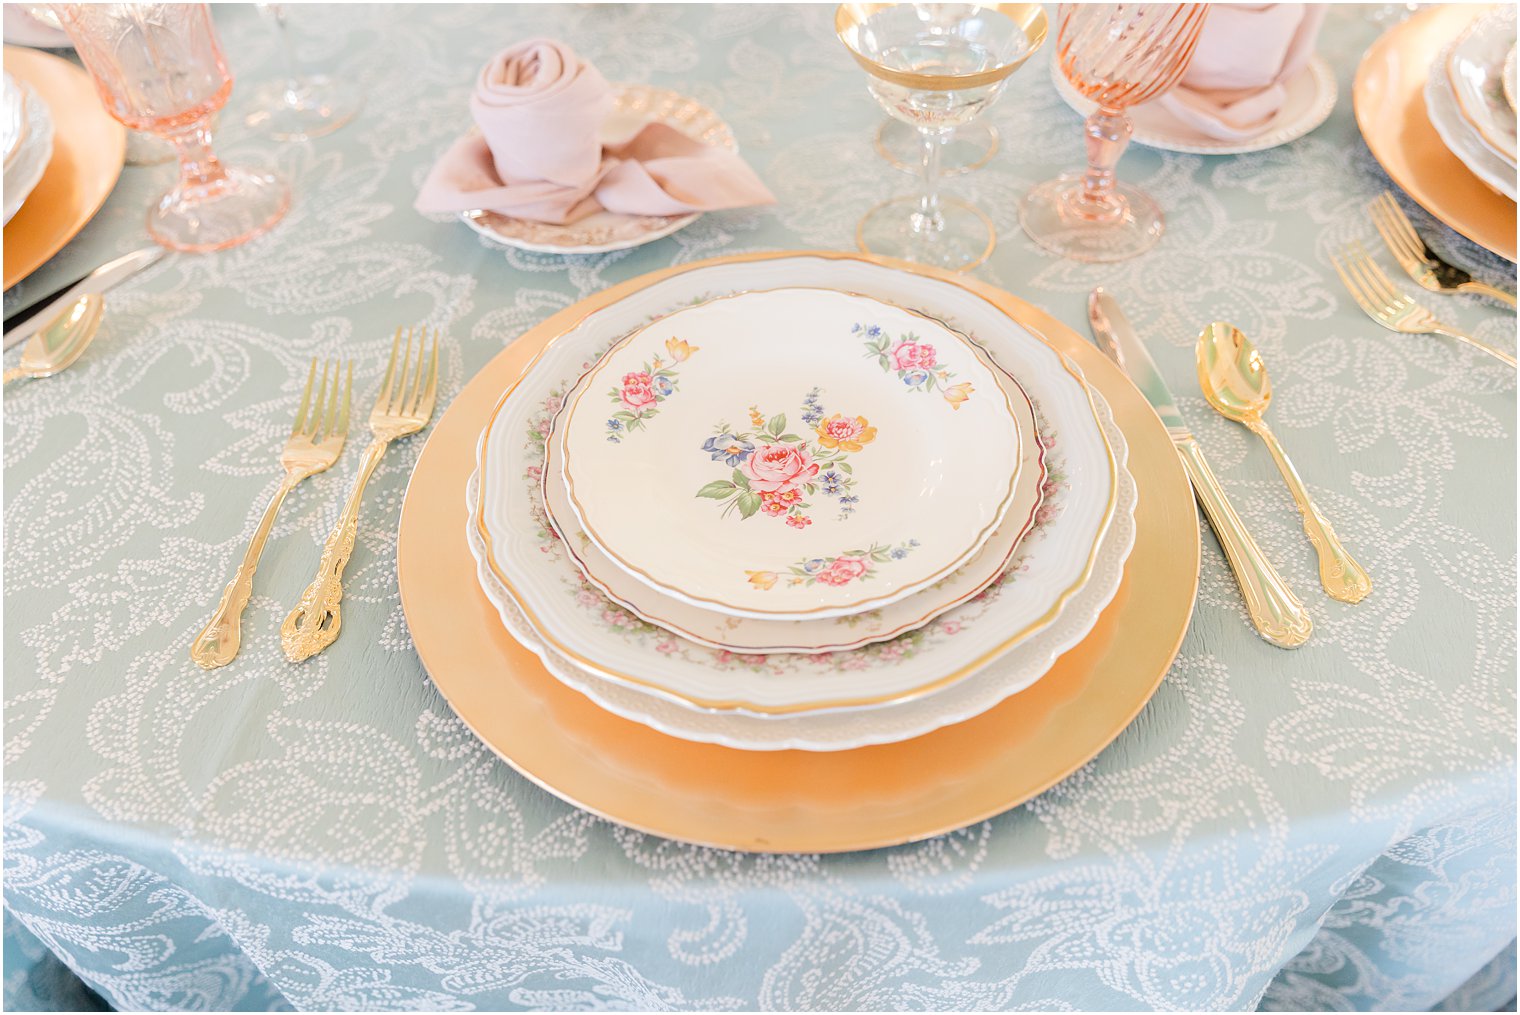 place setting with vintage china on gold chargers